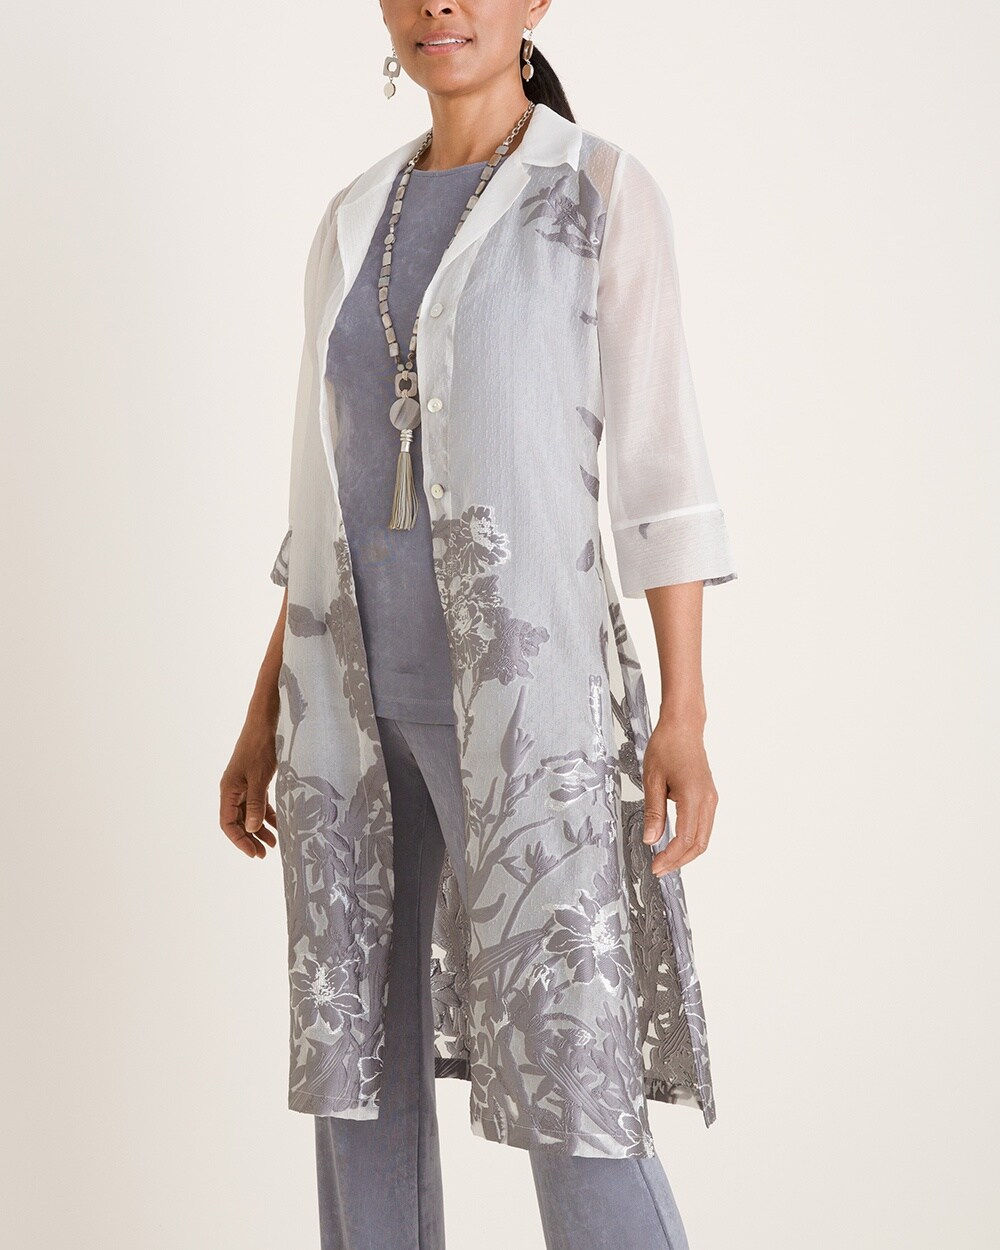 Travelers Collection Jacquard Duster Jacket